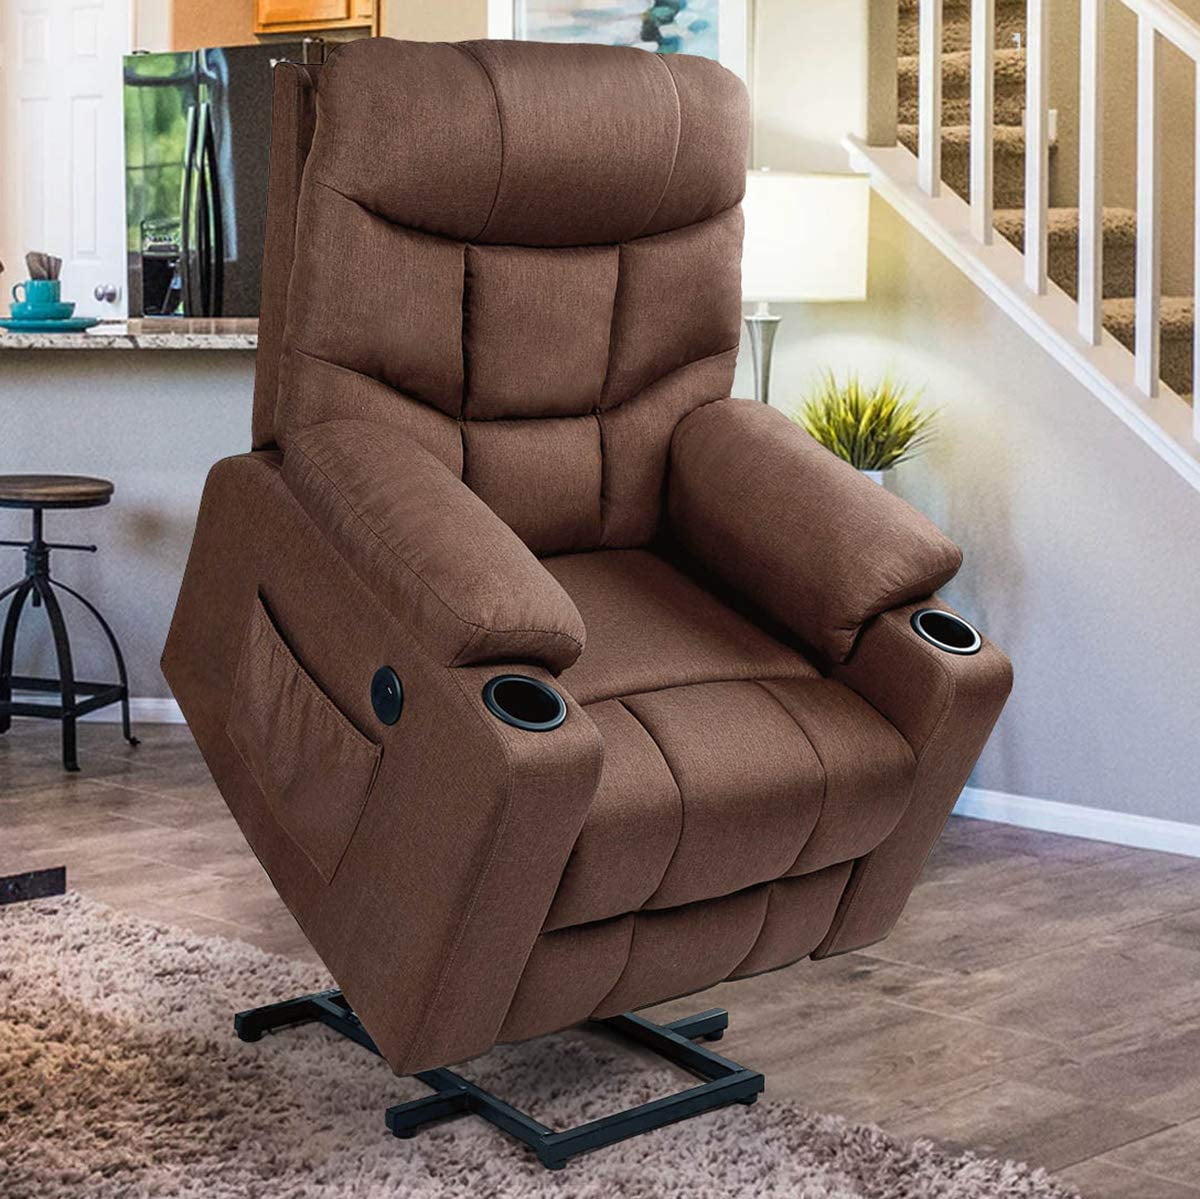 Erommy Power Lift Chair Electric Recliner For Elderly Heated Vibration Fabric Sofa Living Room Chair With 2 Side Pockets And Cup Holders Usb Charge Port Remote Controll Brown Walmart Com Walmart Com